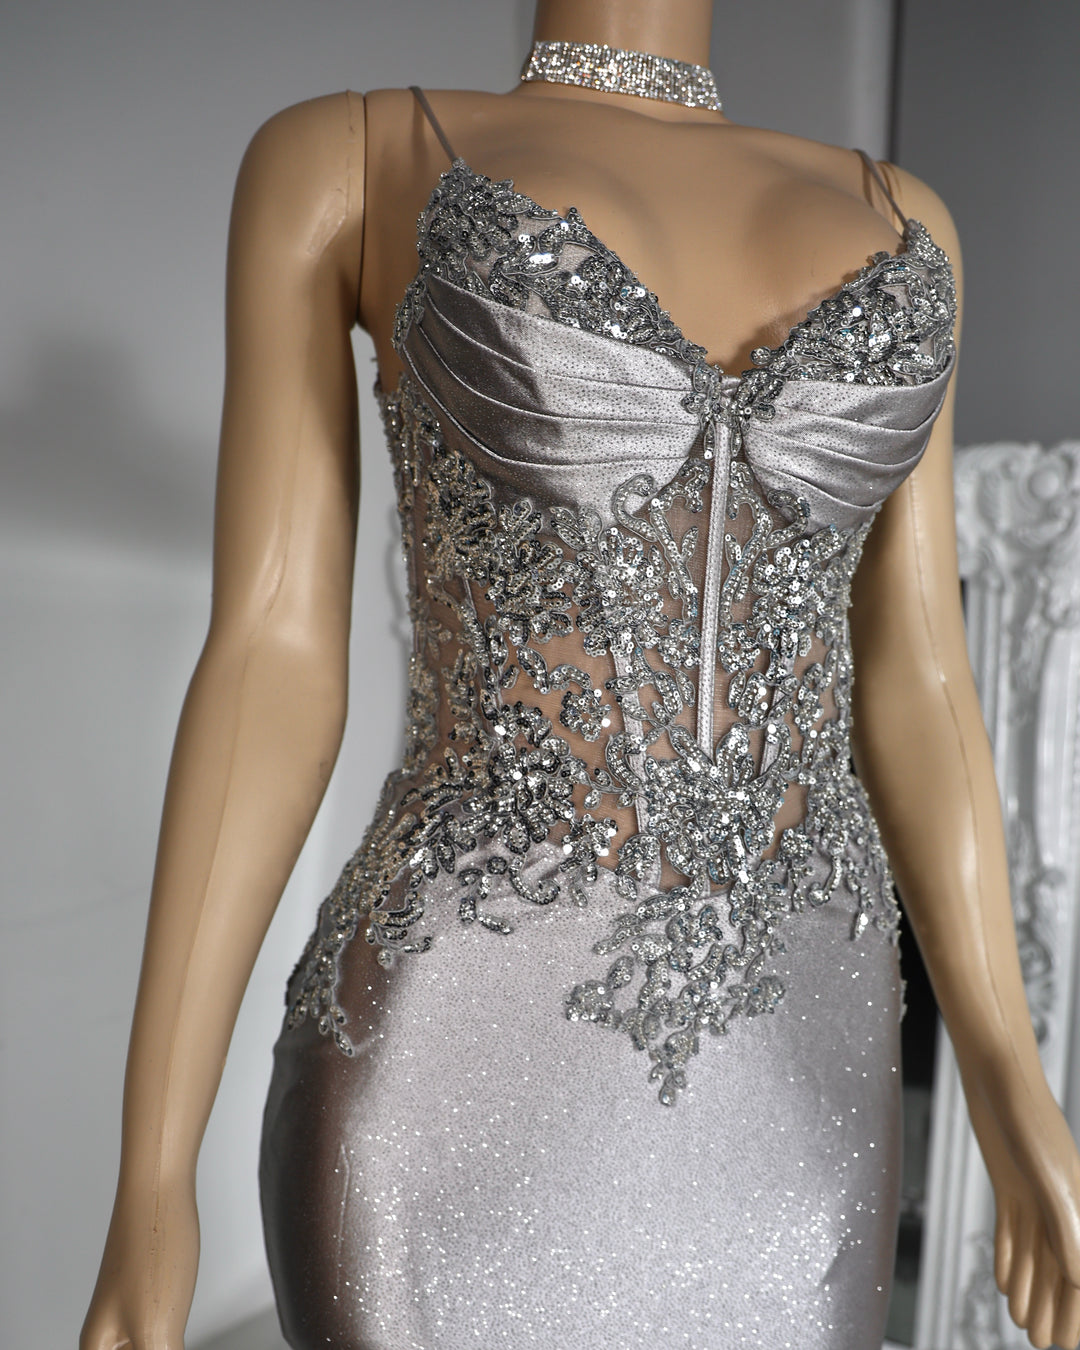 The Gia Glitter Lace Gown